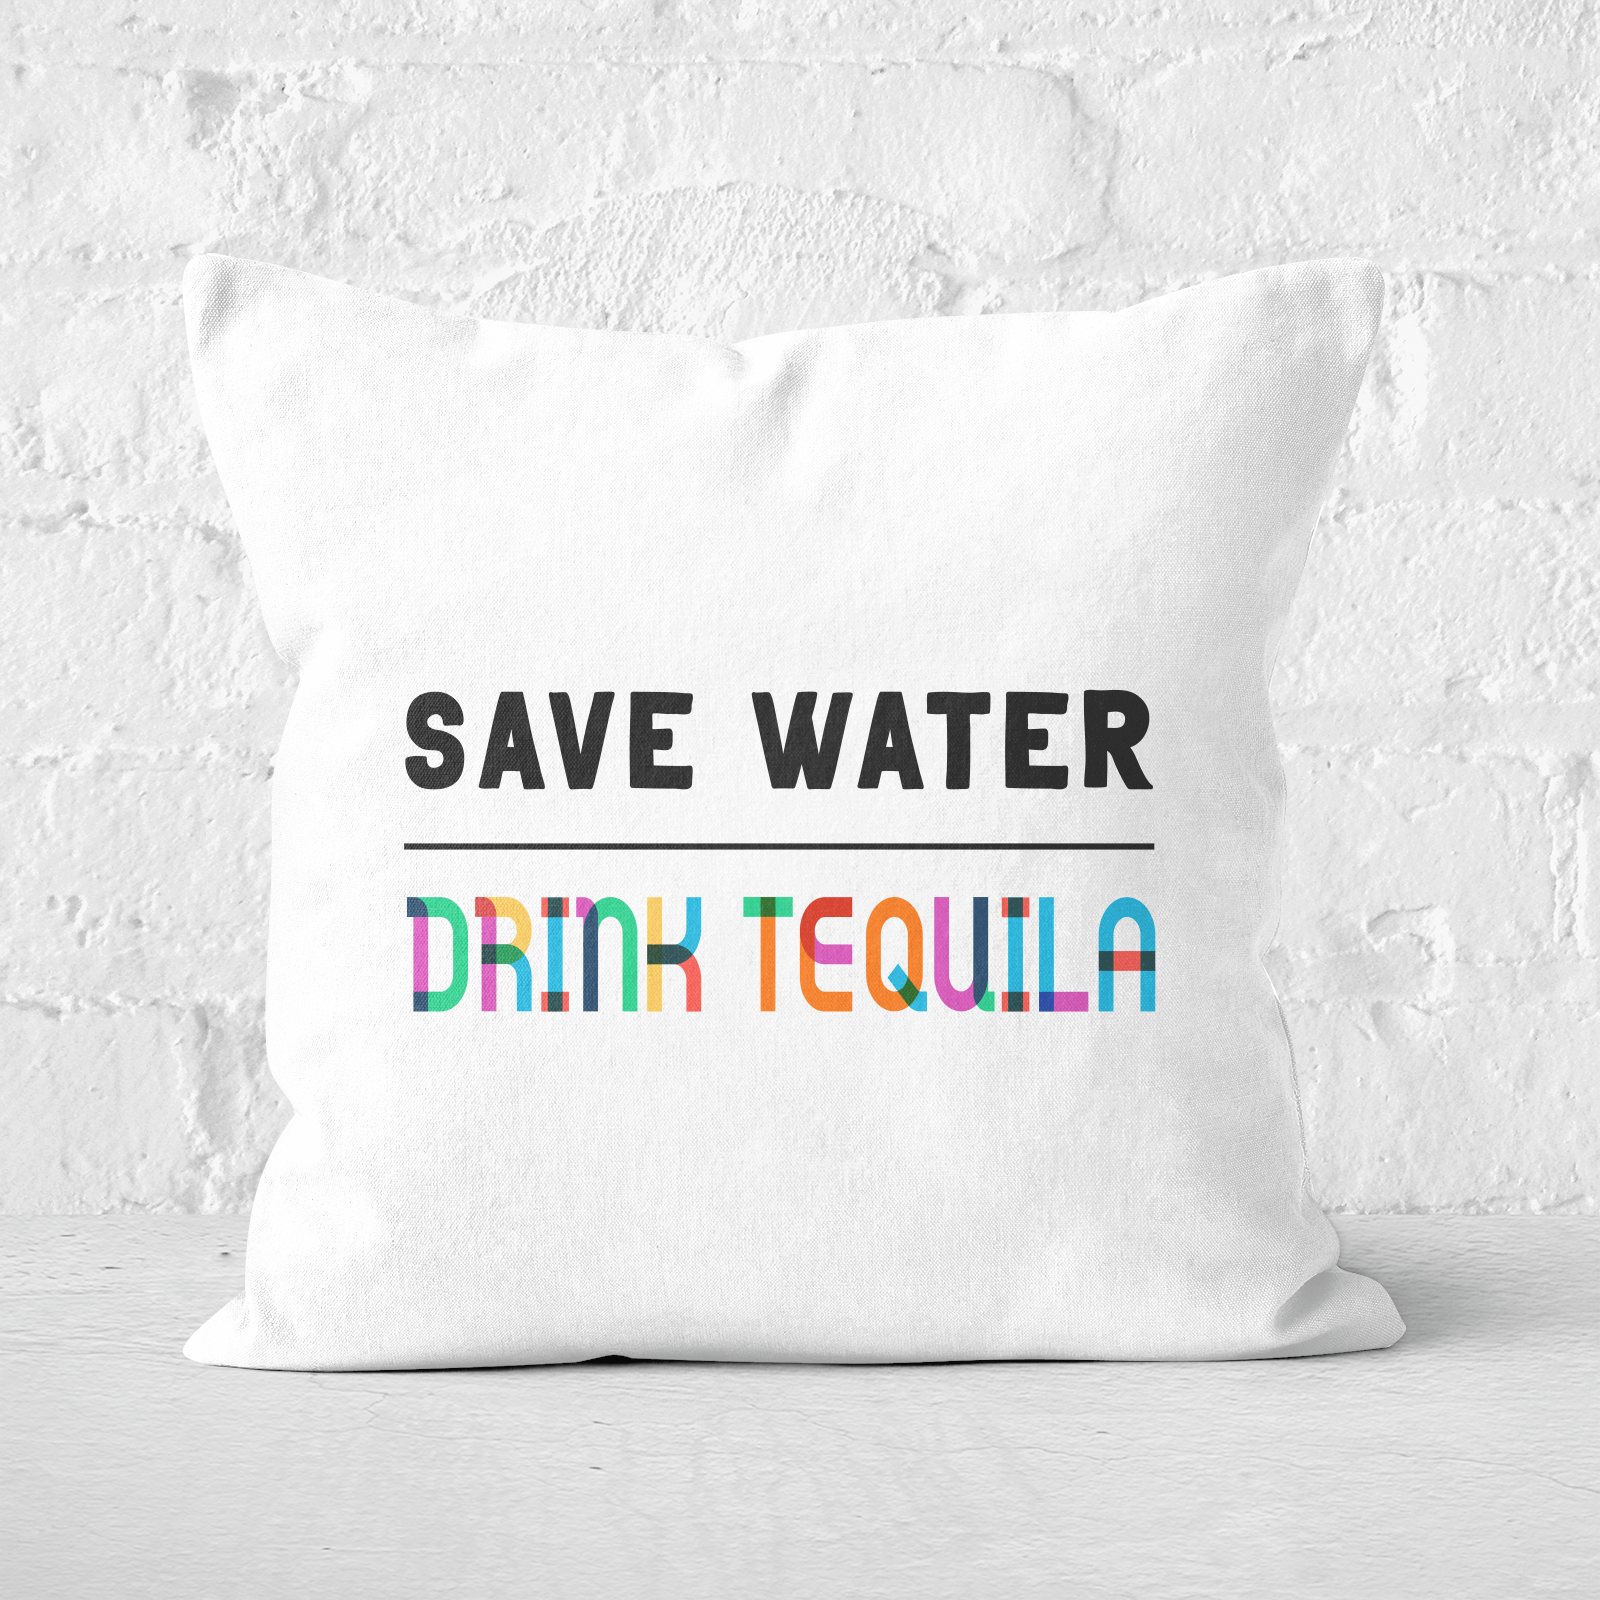 Save Water, Drink Tequila Square Cushion - 60x60cm - Soft Touch